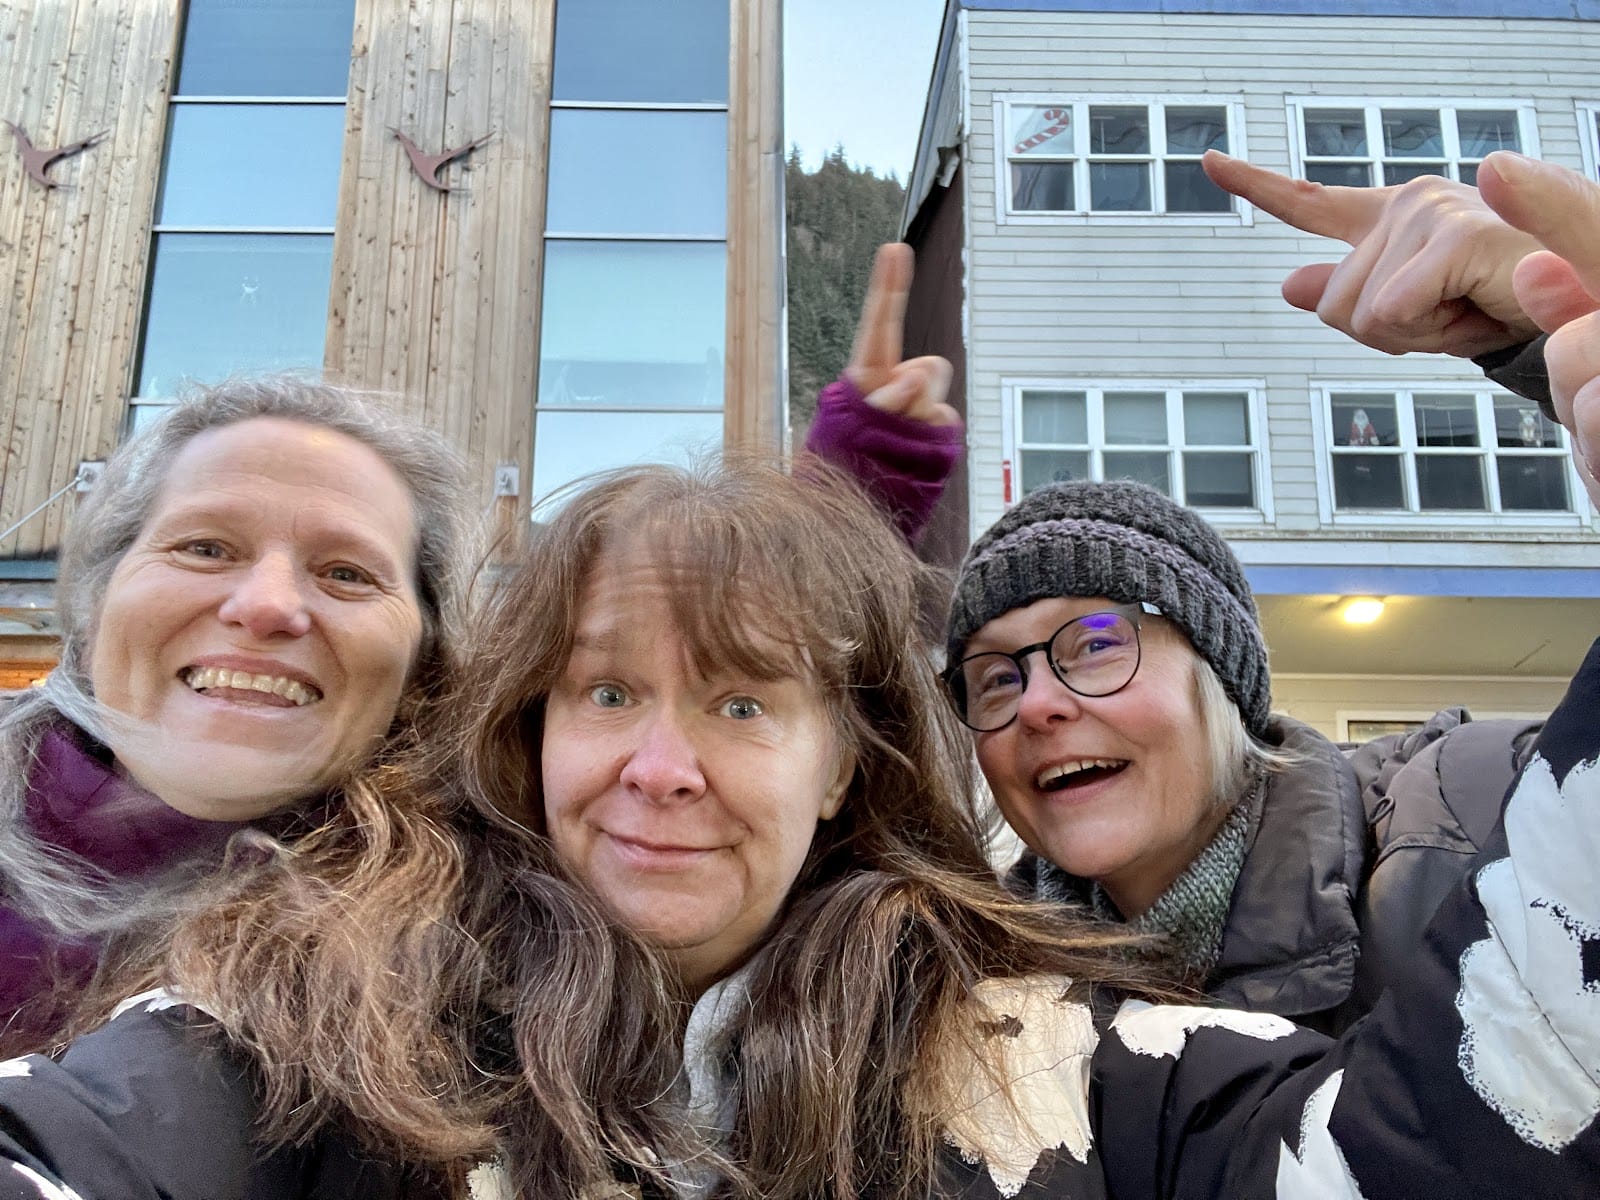 Selfie of three adults pointing to the window in the building behind them.